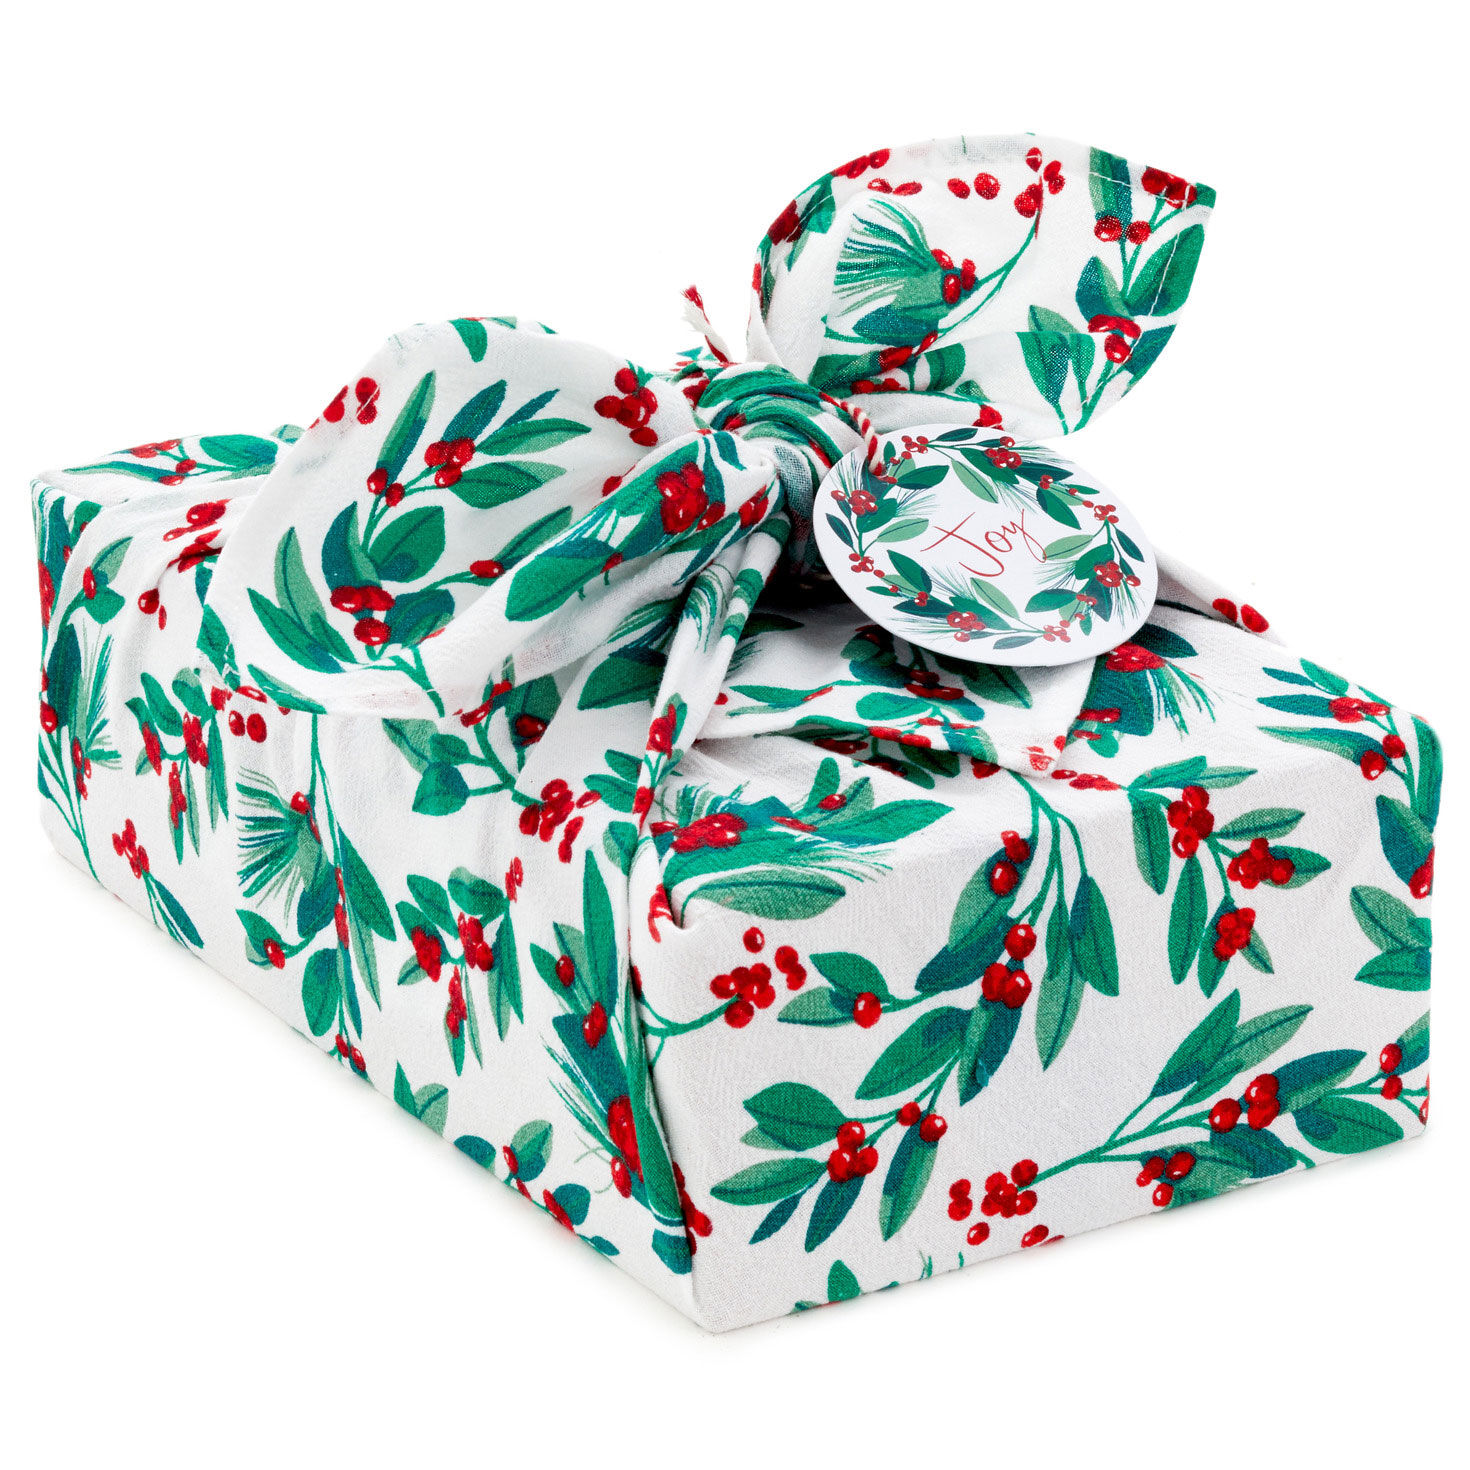 https://www.hallmark.com/dw/image/v2/AALB_PRD/on/demandware.static/-/Sites-hallmark-master/default/dw3ec91b75/images/finished-goods/products/5XW2087/Greenery-and-Berries-Christmas-Fabric-Gift-Wrap-With-Tag_5XW2087_01.jpg?sfrm=jpg